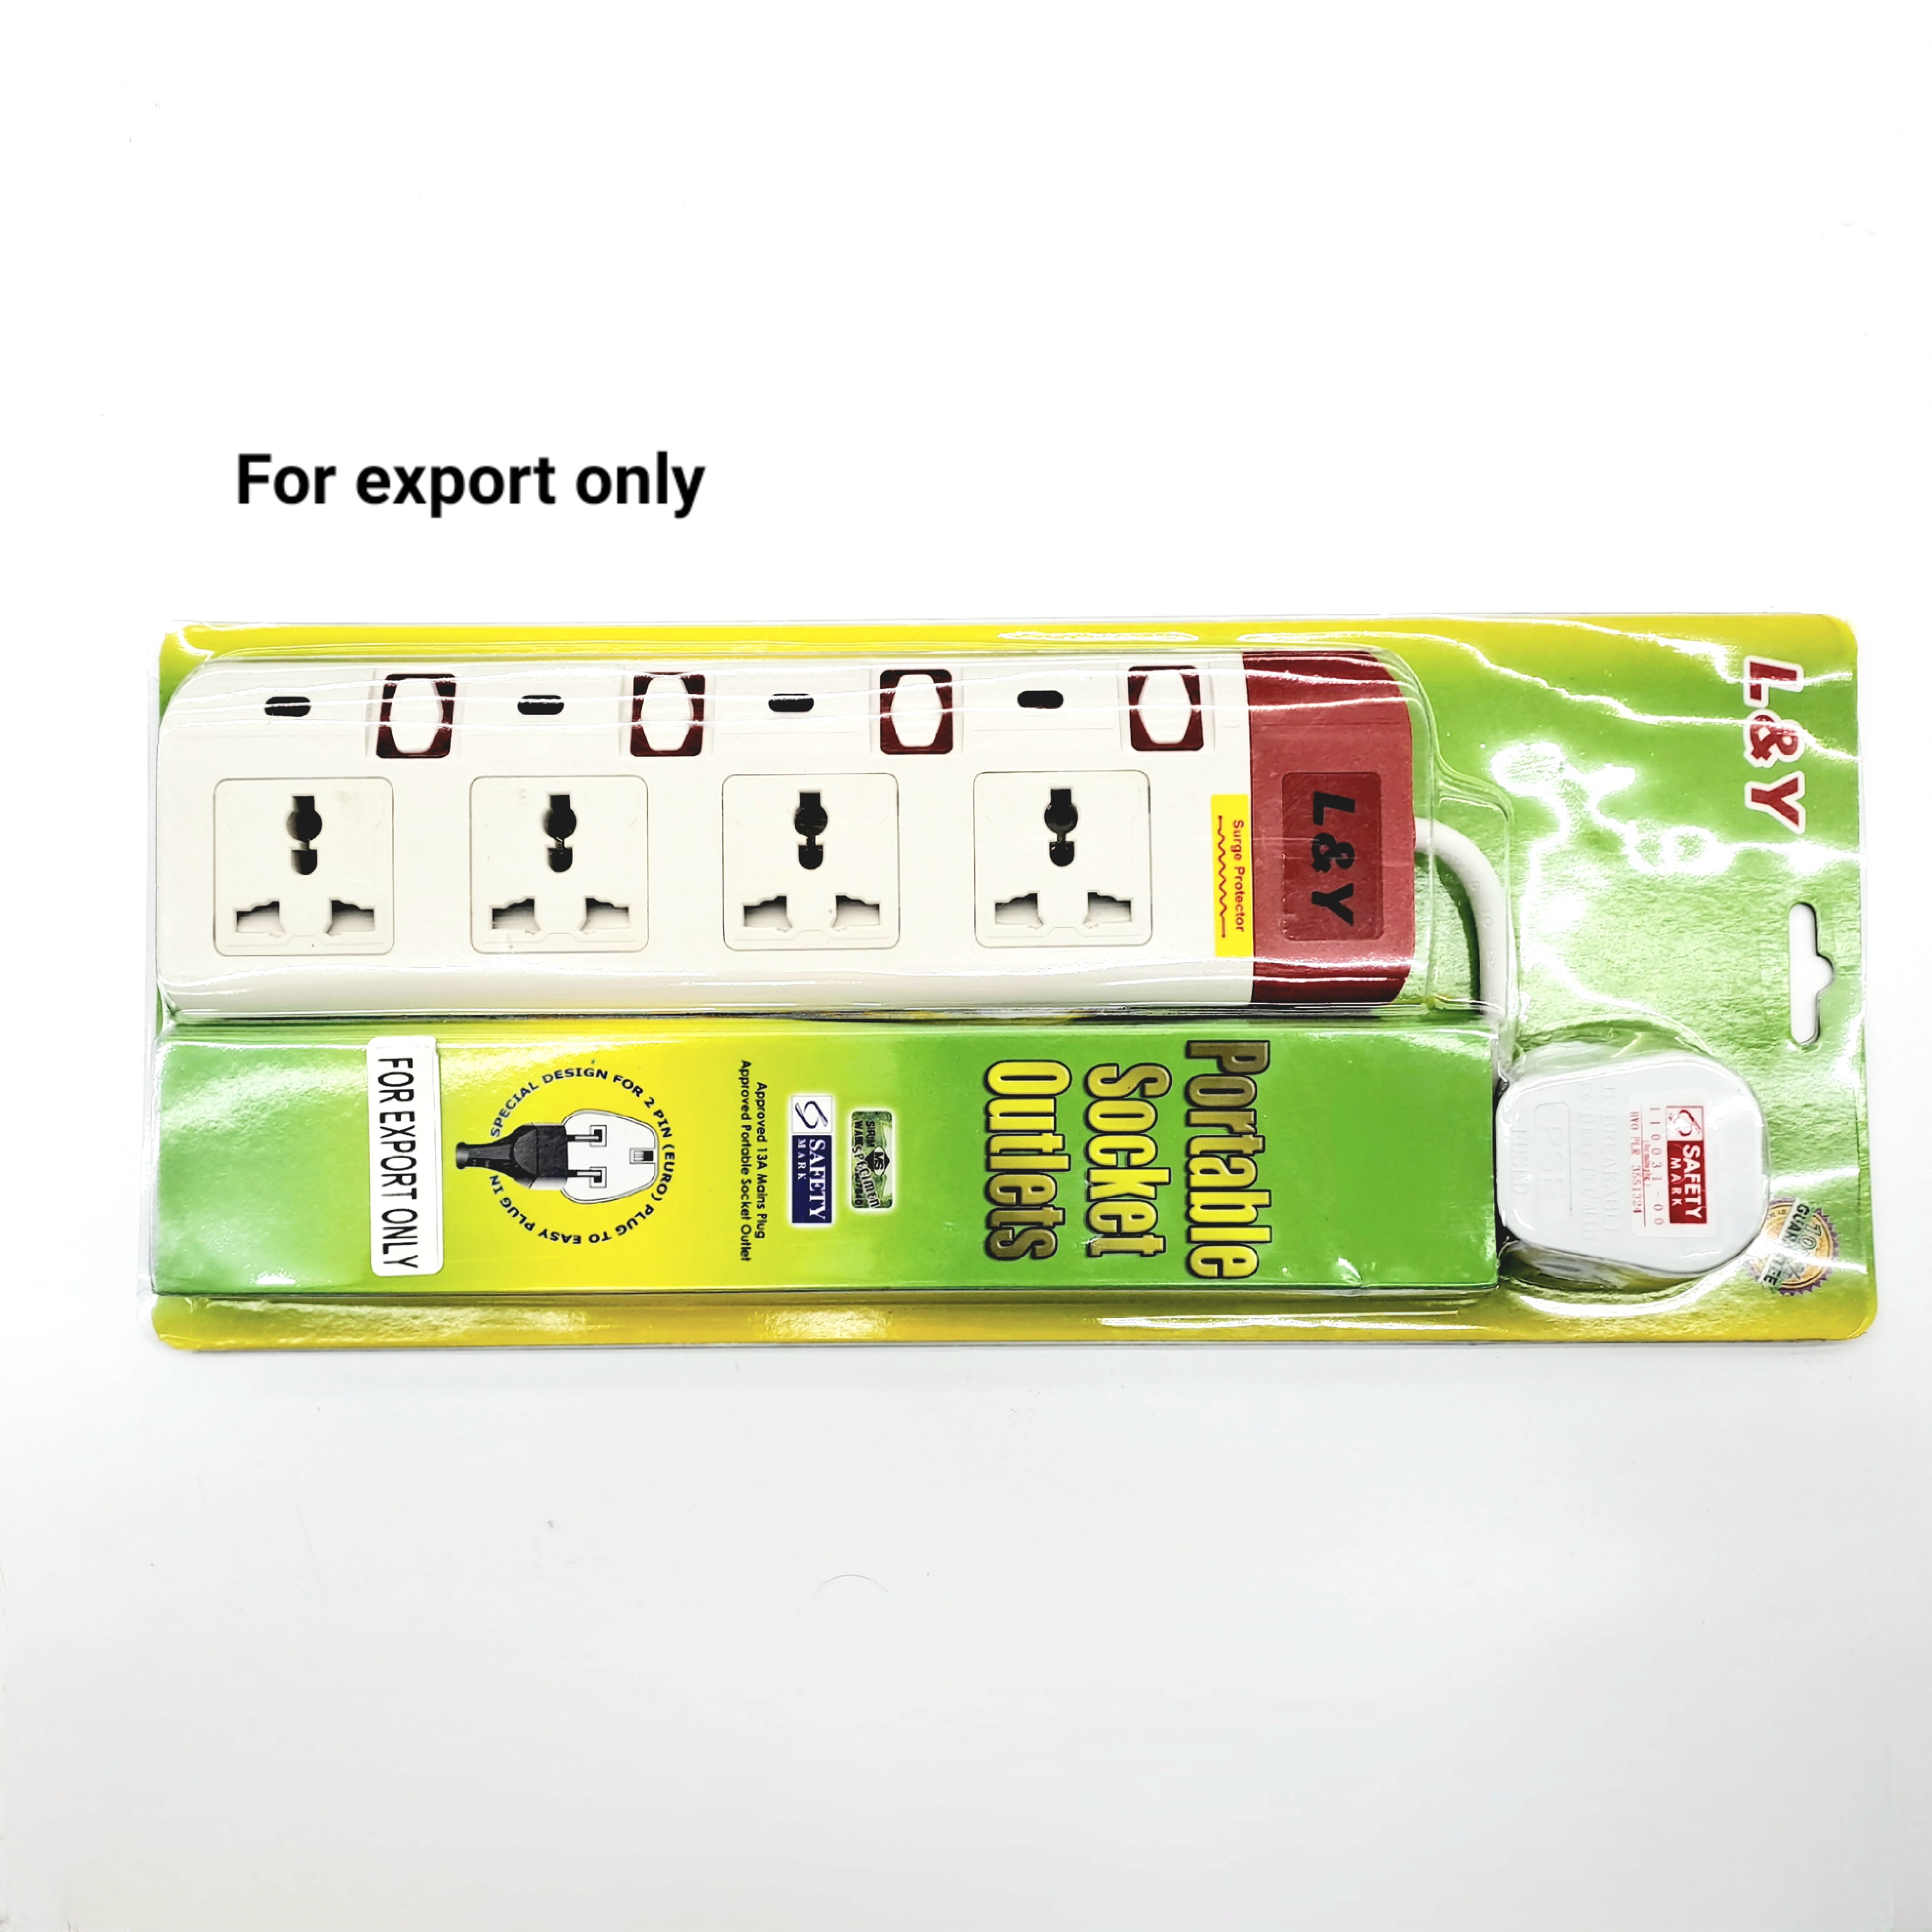 L&Y 4 Way 3pin Multi Socket Outlet-3M (for export only)